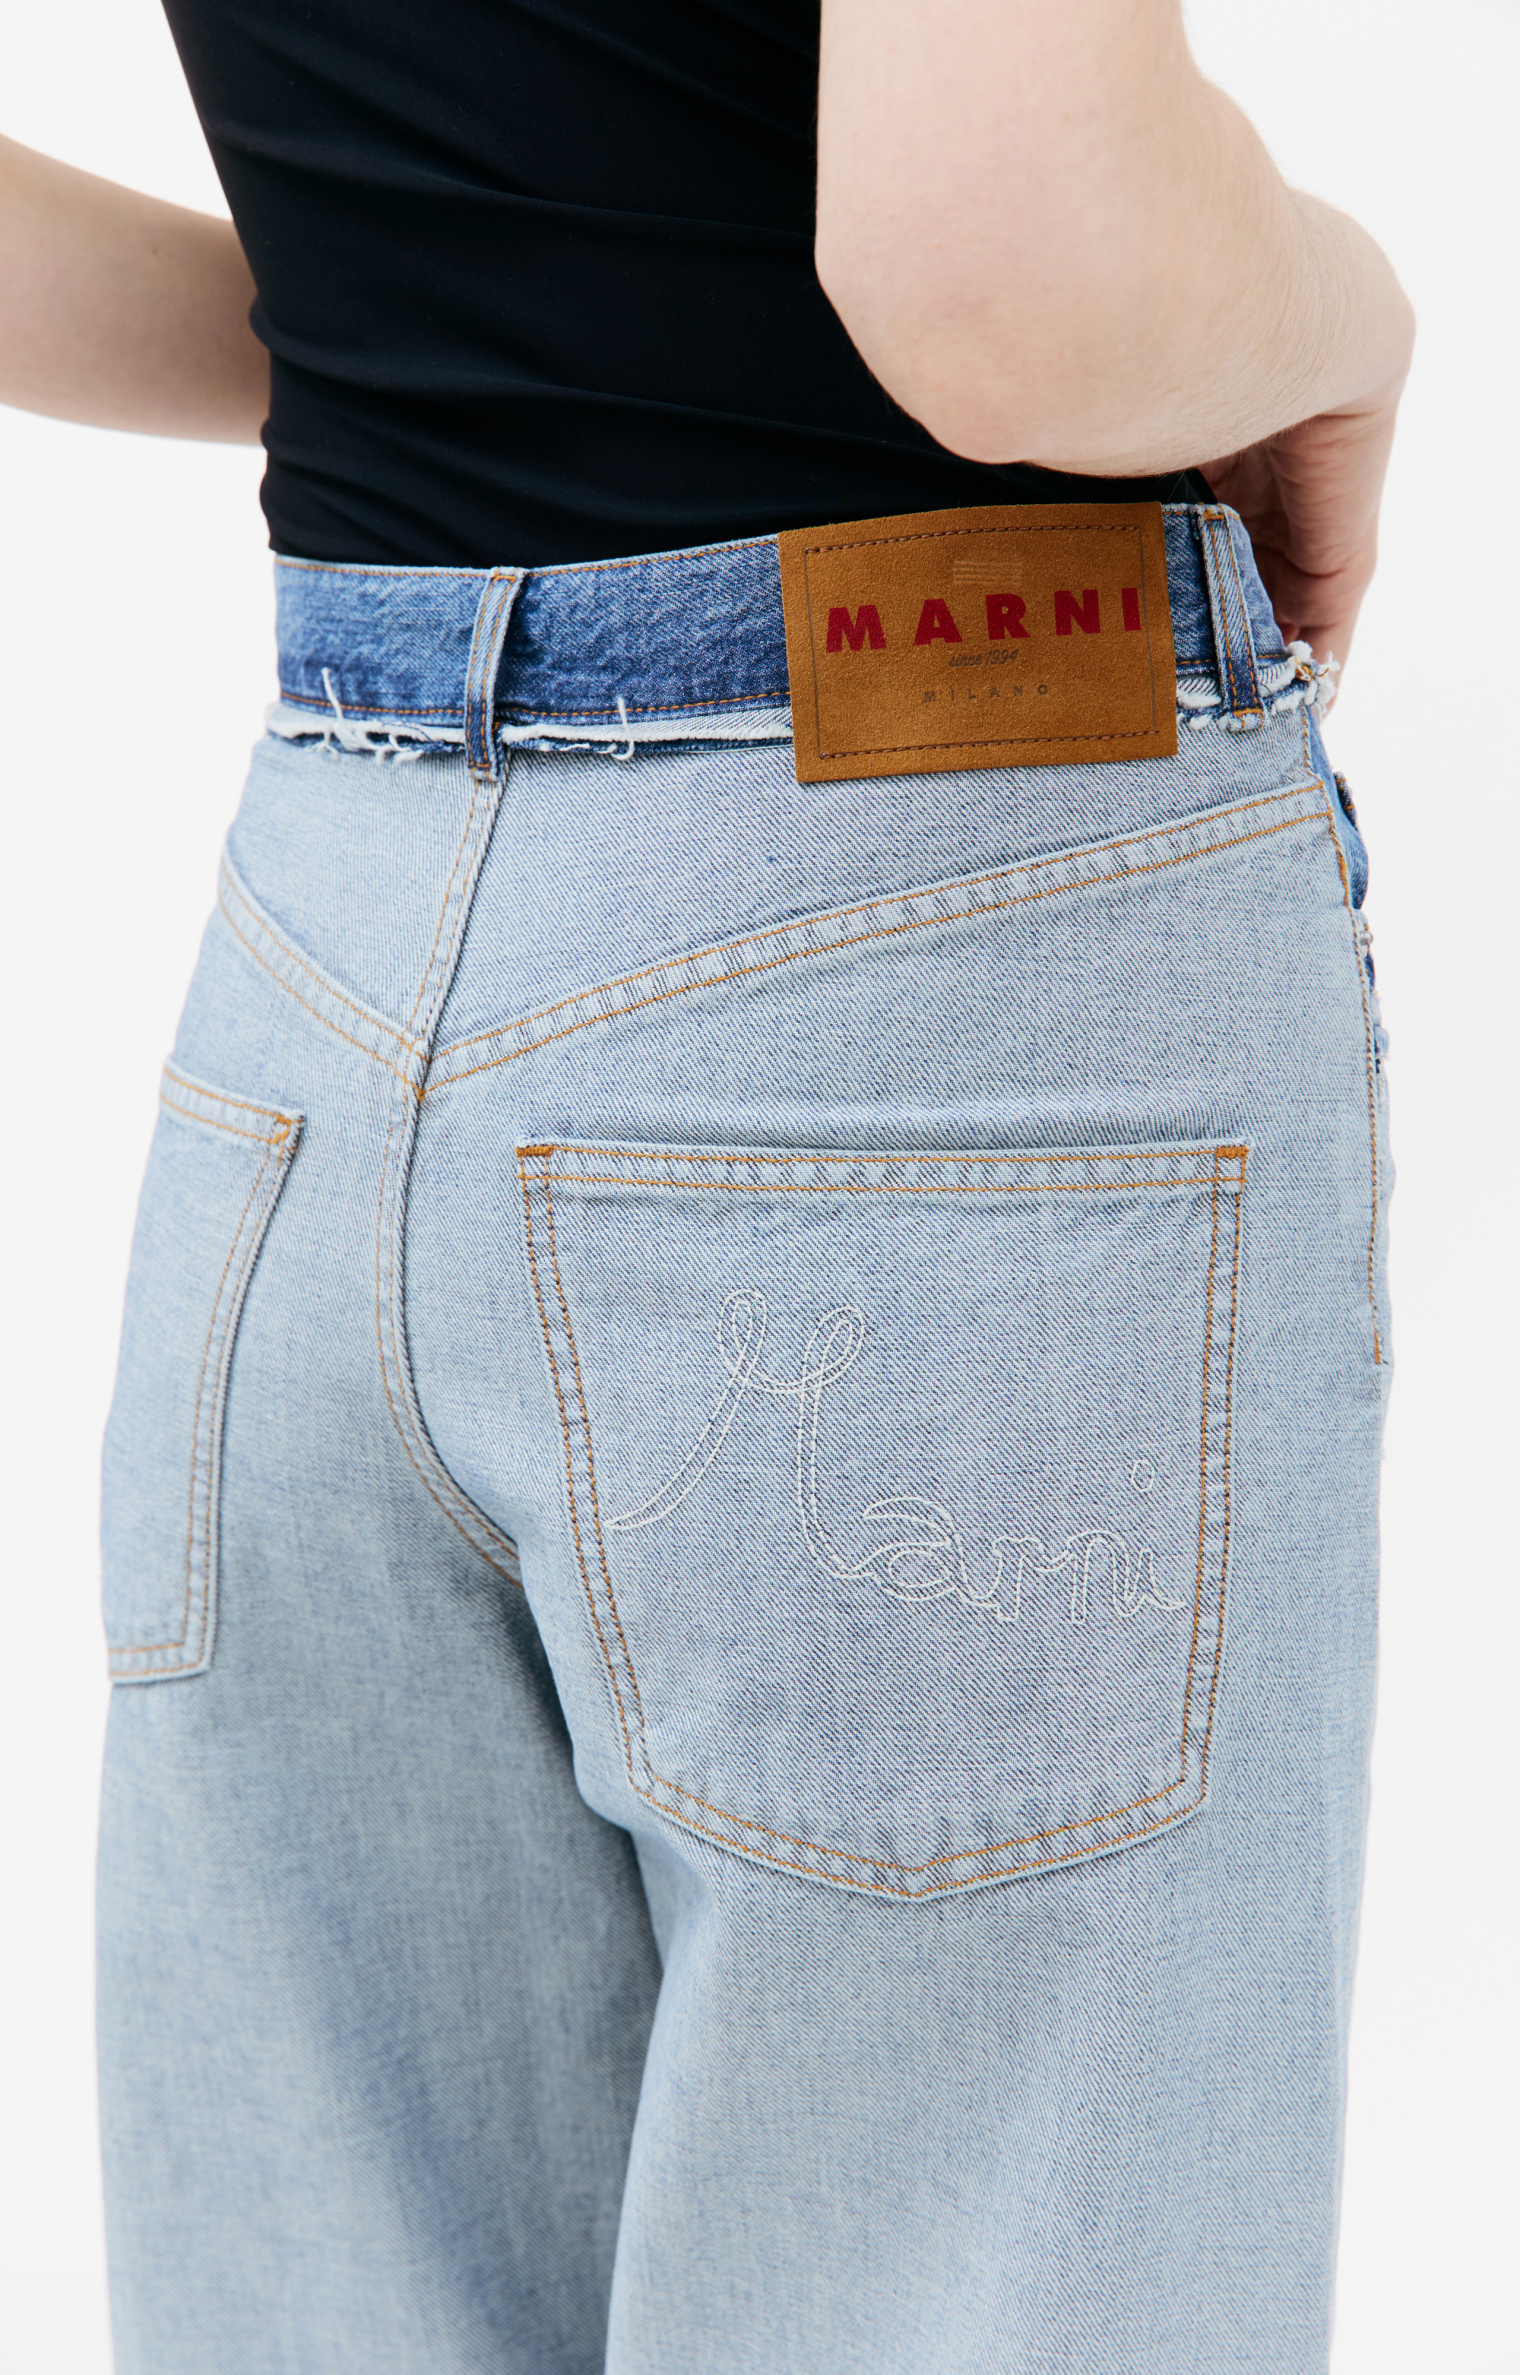 Marni Blue inside-out jeans